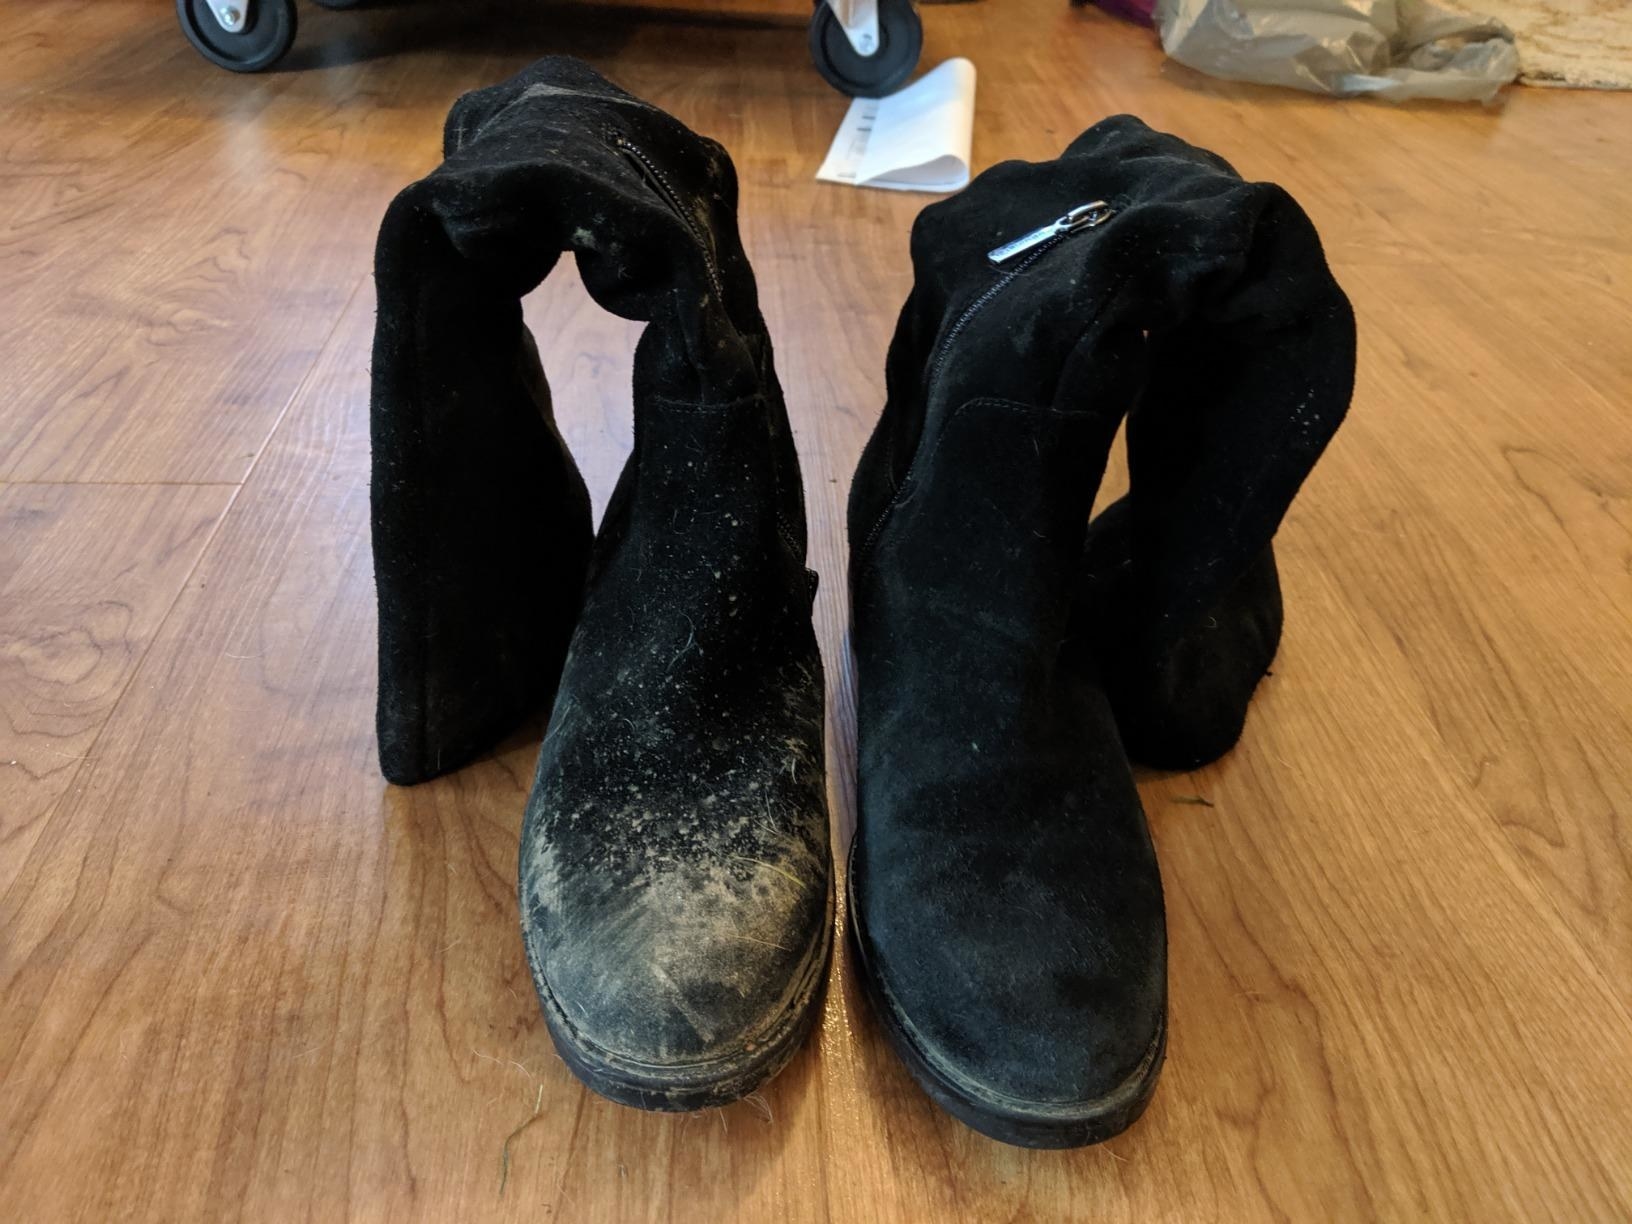 A reviewer's black suede boots: the left covered in light brown dirt, the right completely clean and new-looking